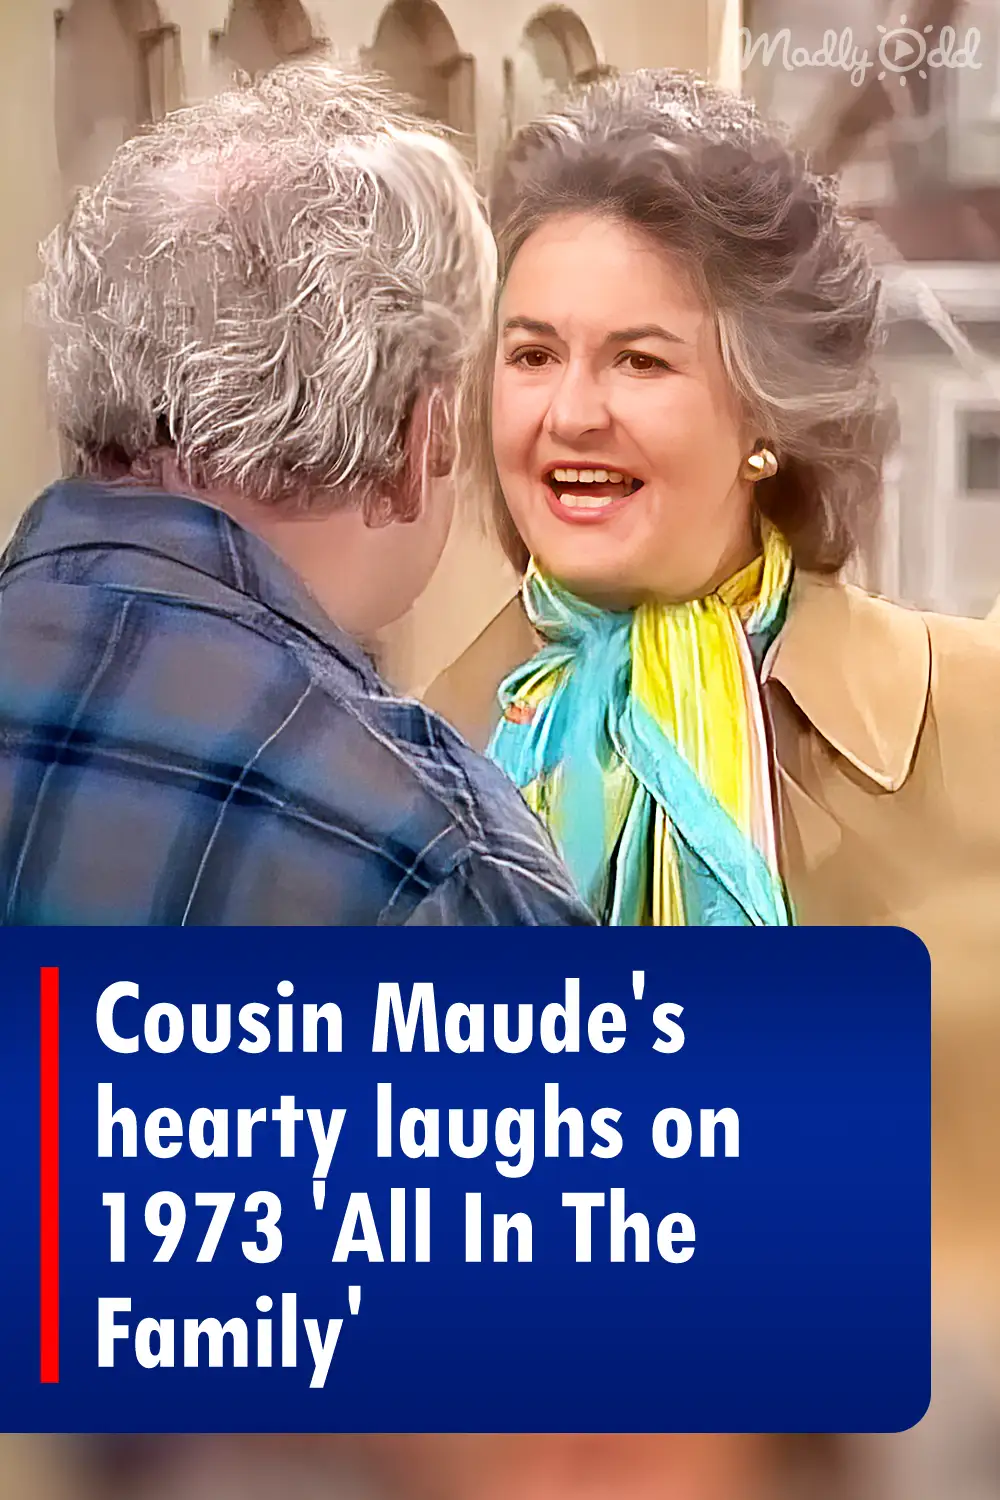 Cousin Maude\'s hearty laughs on 1973 \'All In The Family\'